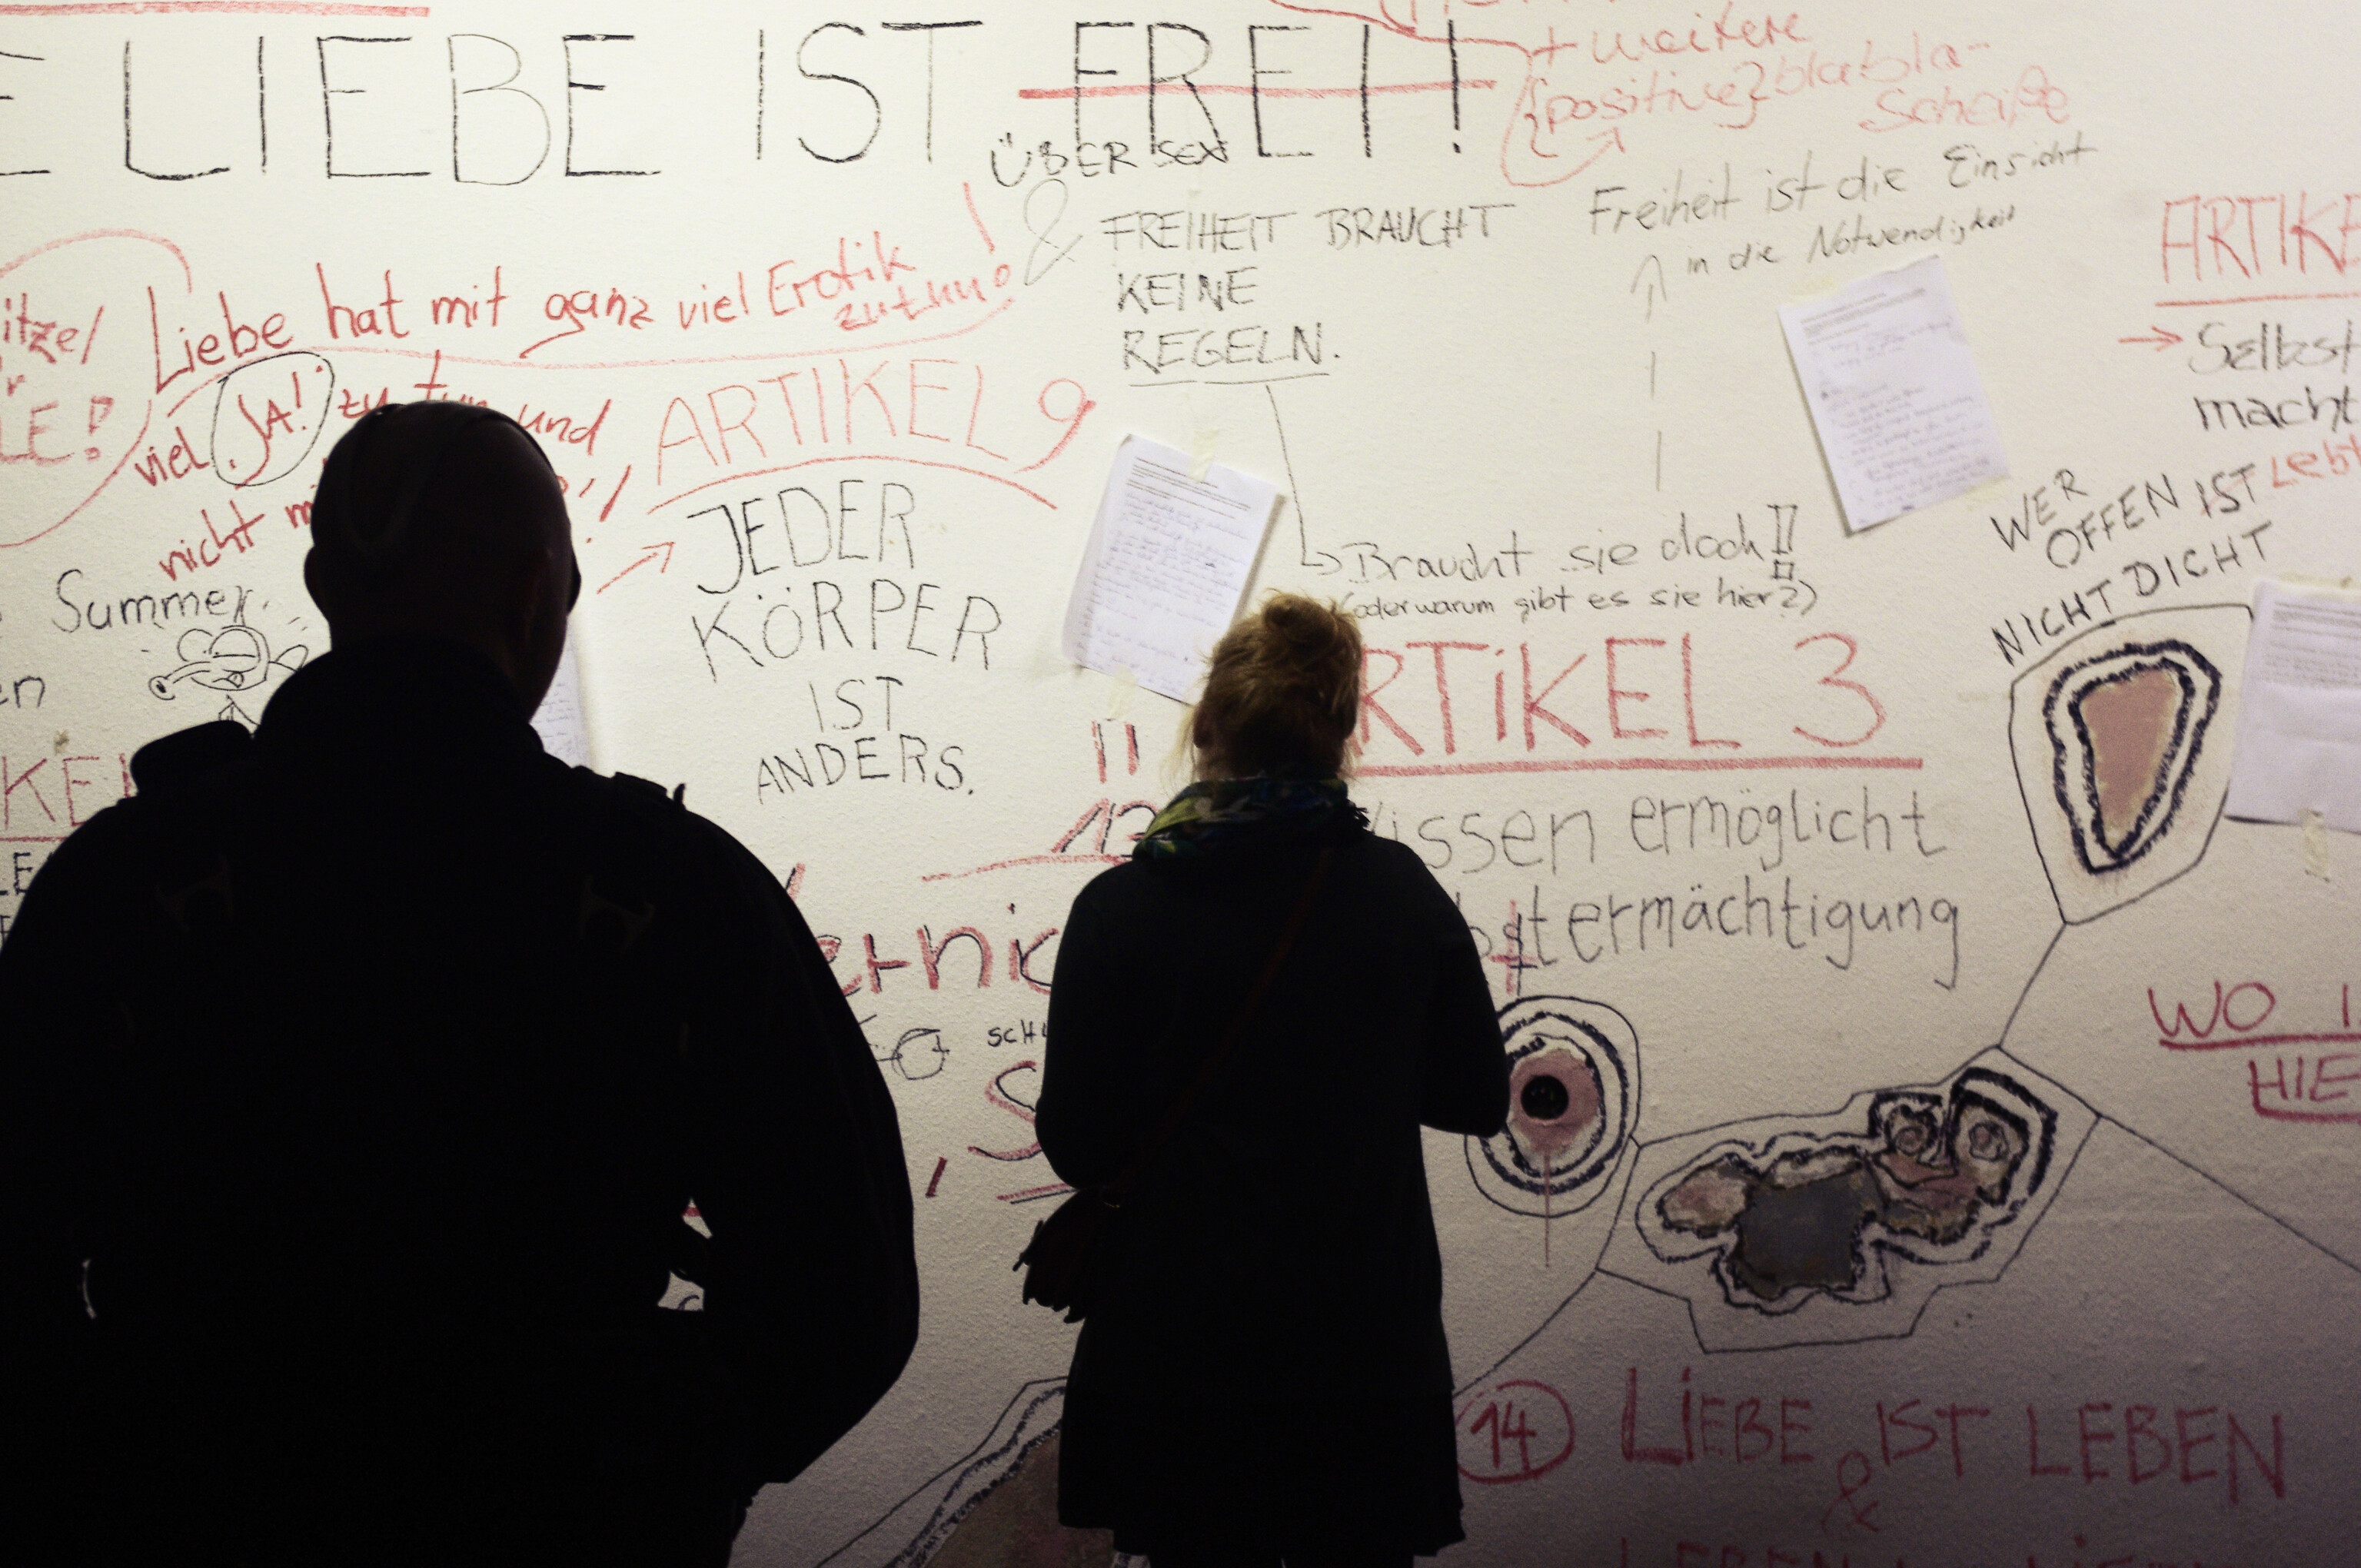 This picture shows two people whose silhouette we see from behind. They are looking at a white wall on which several messages are written in black and red letters.